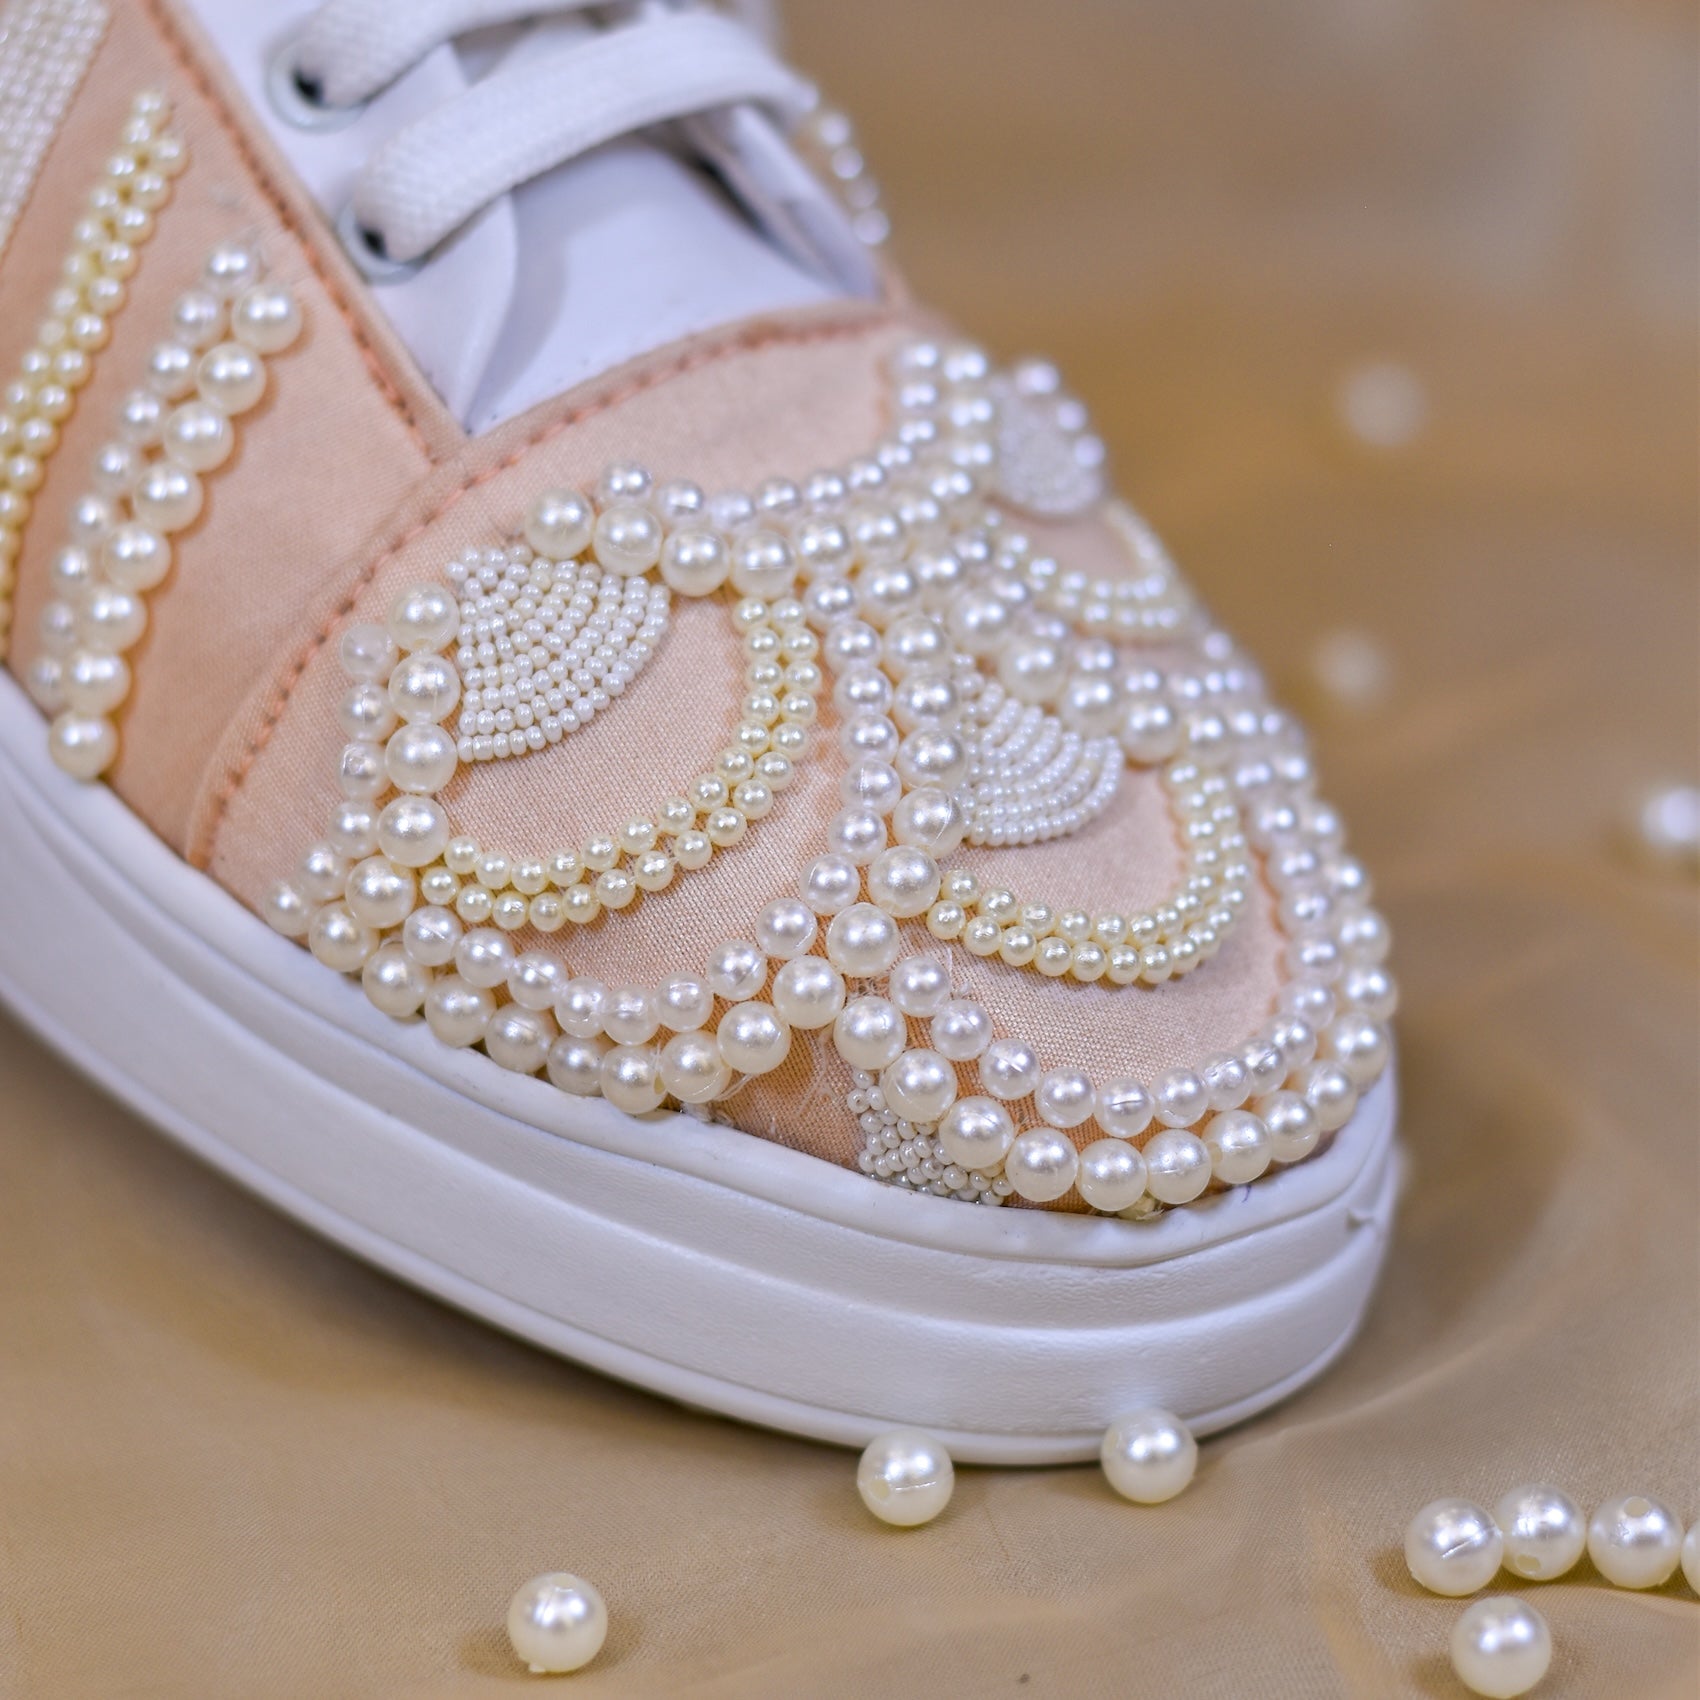 Pastel tone embroidery on wedding sneakers